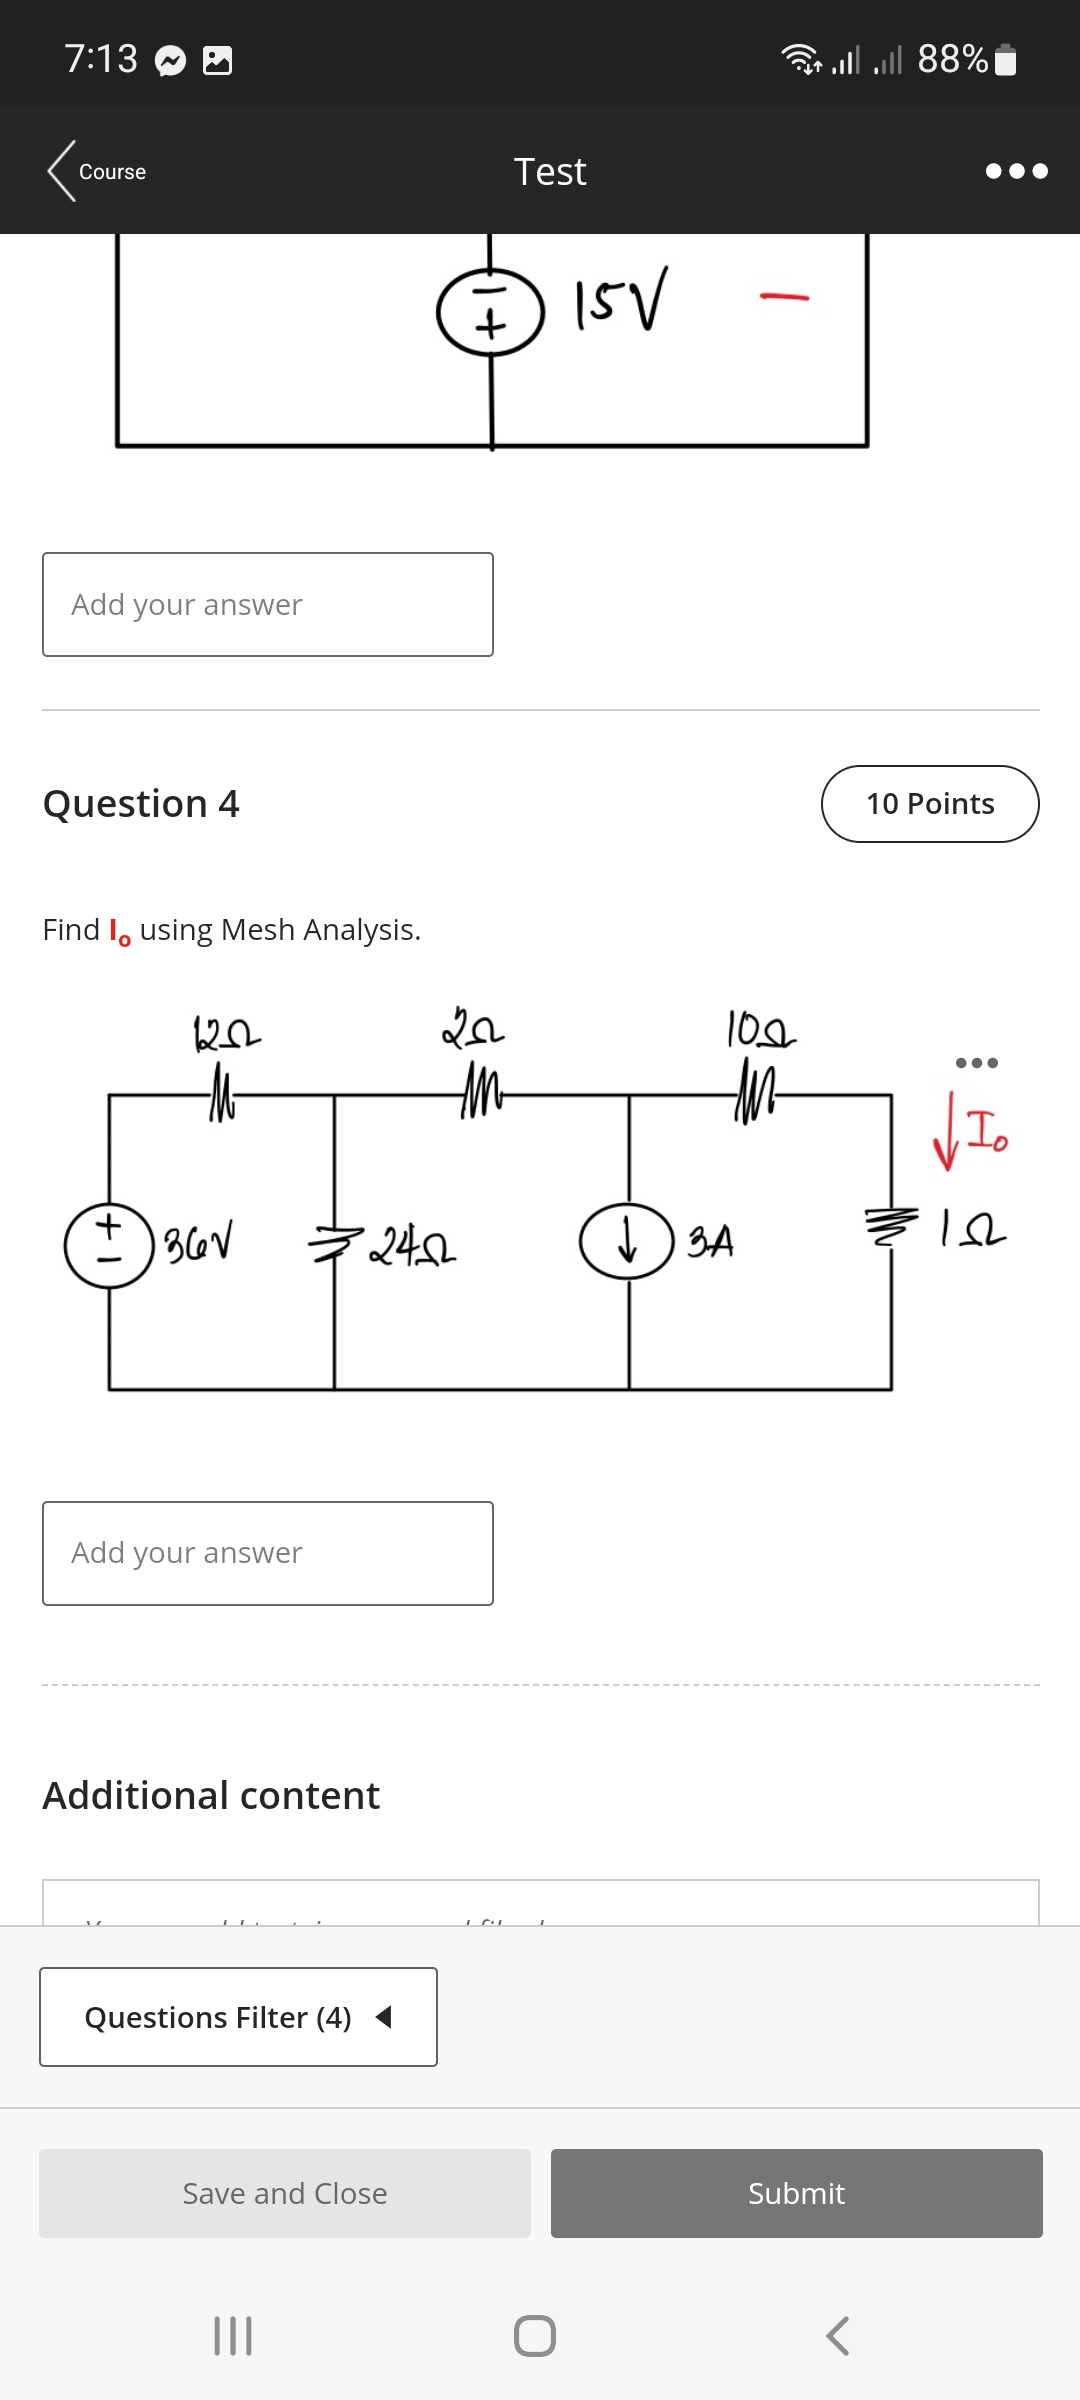 7:13
Course
Add your answer
Question 4
Find I, using Mesh Analysis.
+
12-02
-M-
36√
Add your answer
Additional content
Questions Filter (4)
245
Save and Close
|||
1+
22
M
Test
O
15%
100
3A
Submit
أ%88 | |
<
10 Points
Io
18